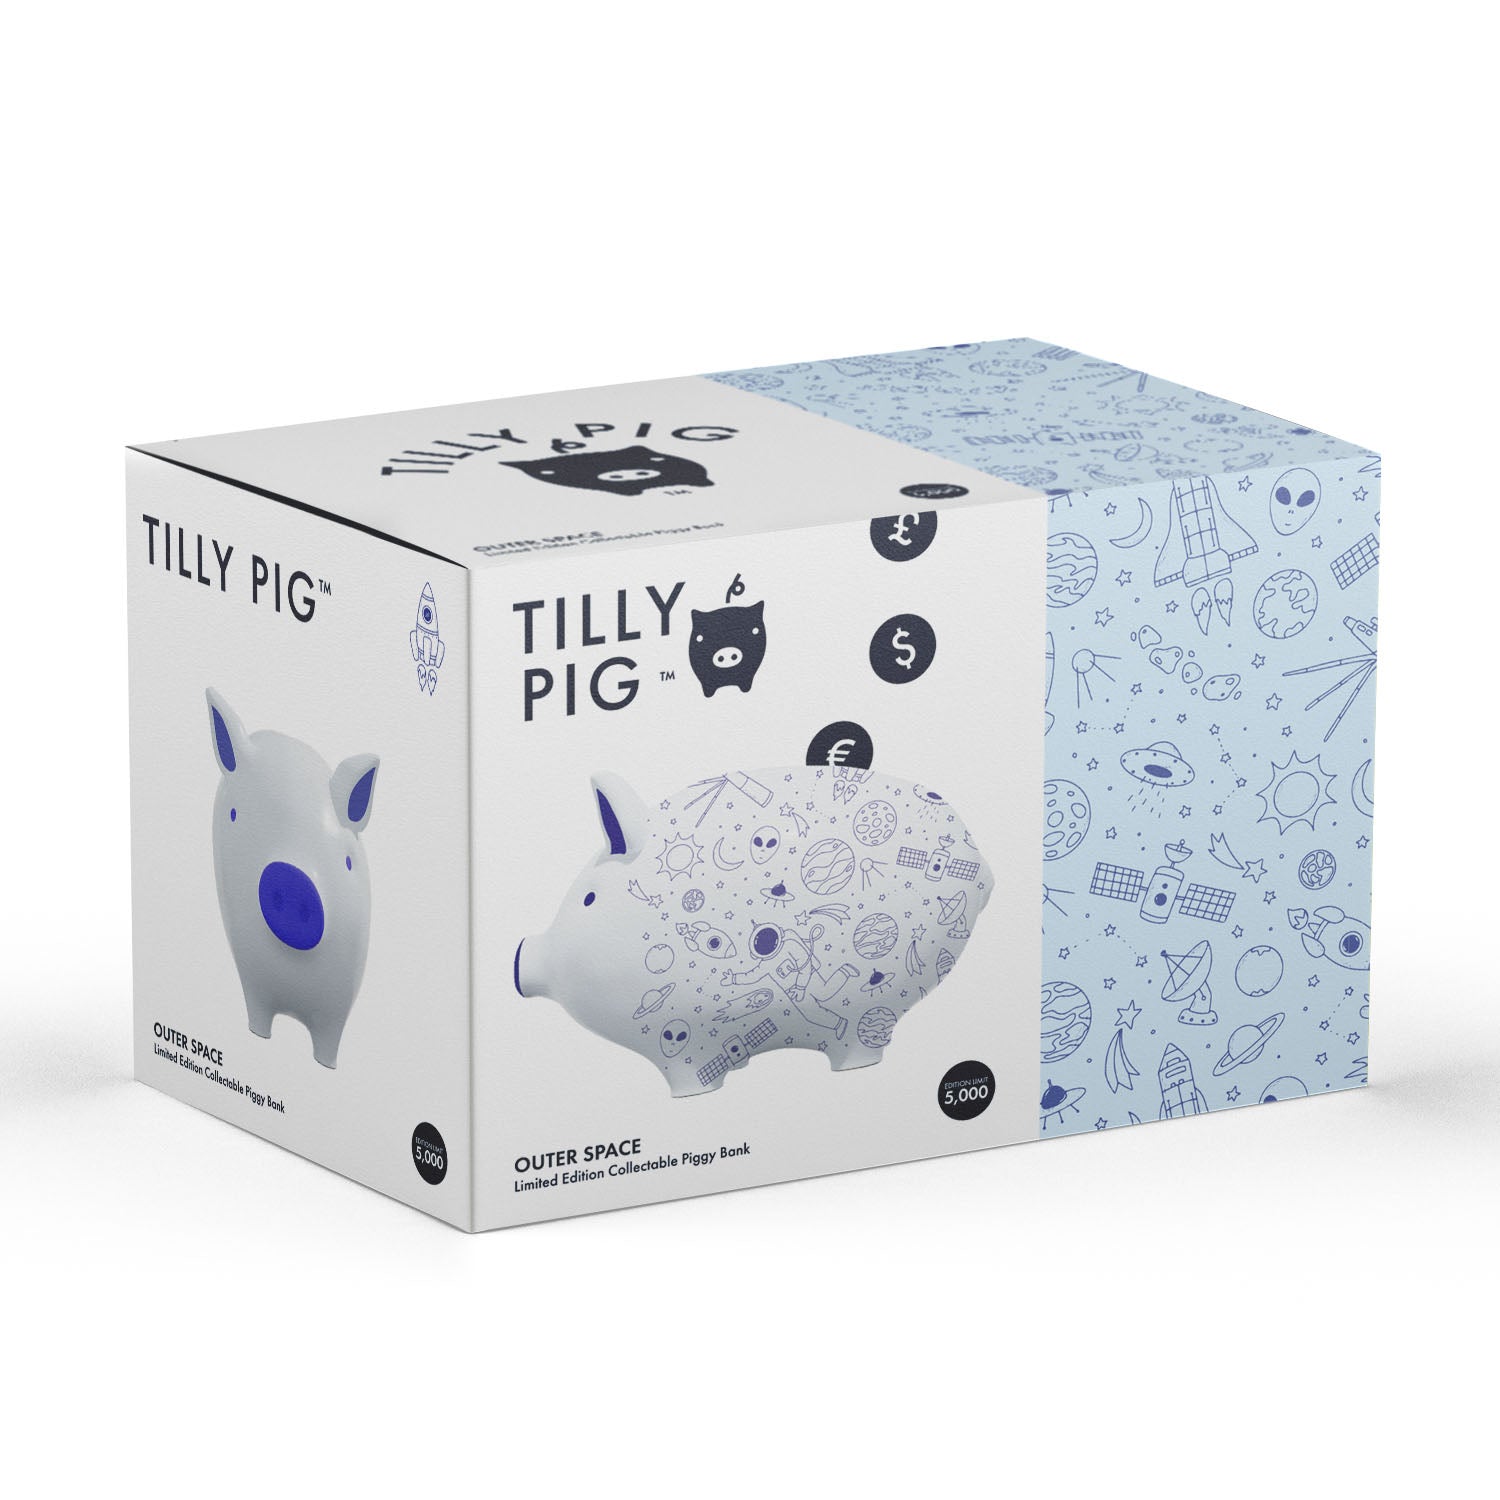 Tilly Pig - Outer Space Piggy Bank